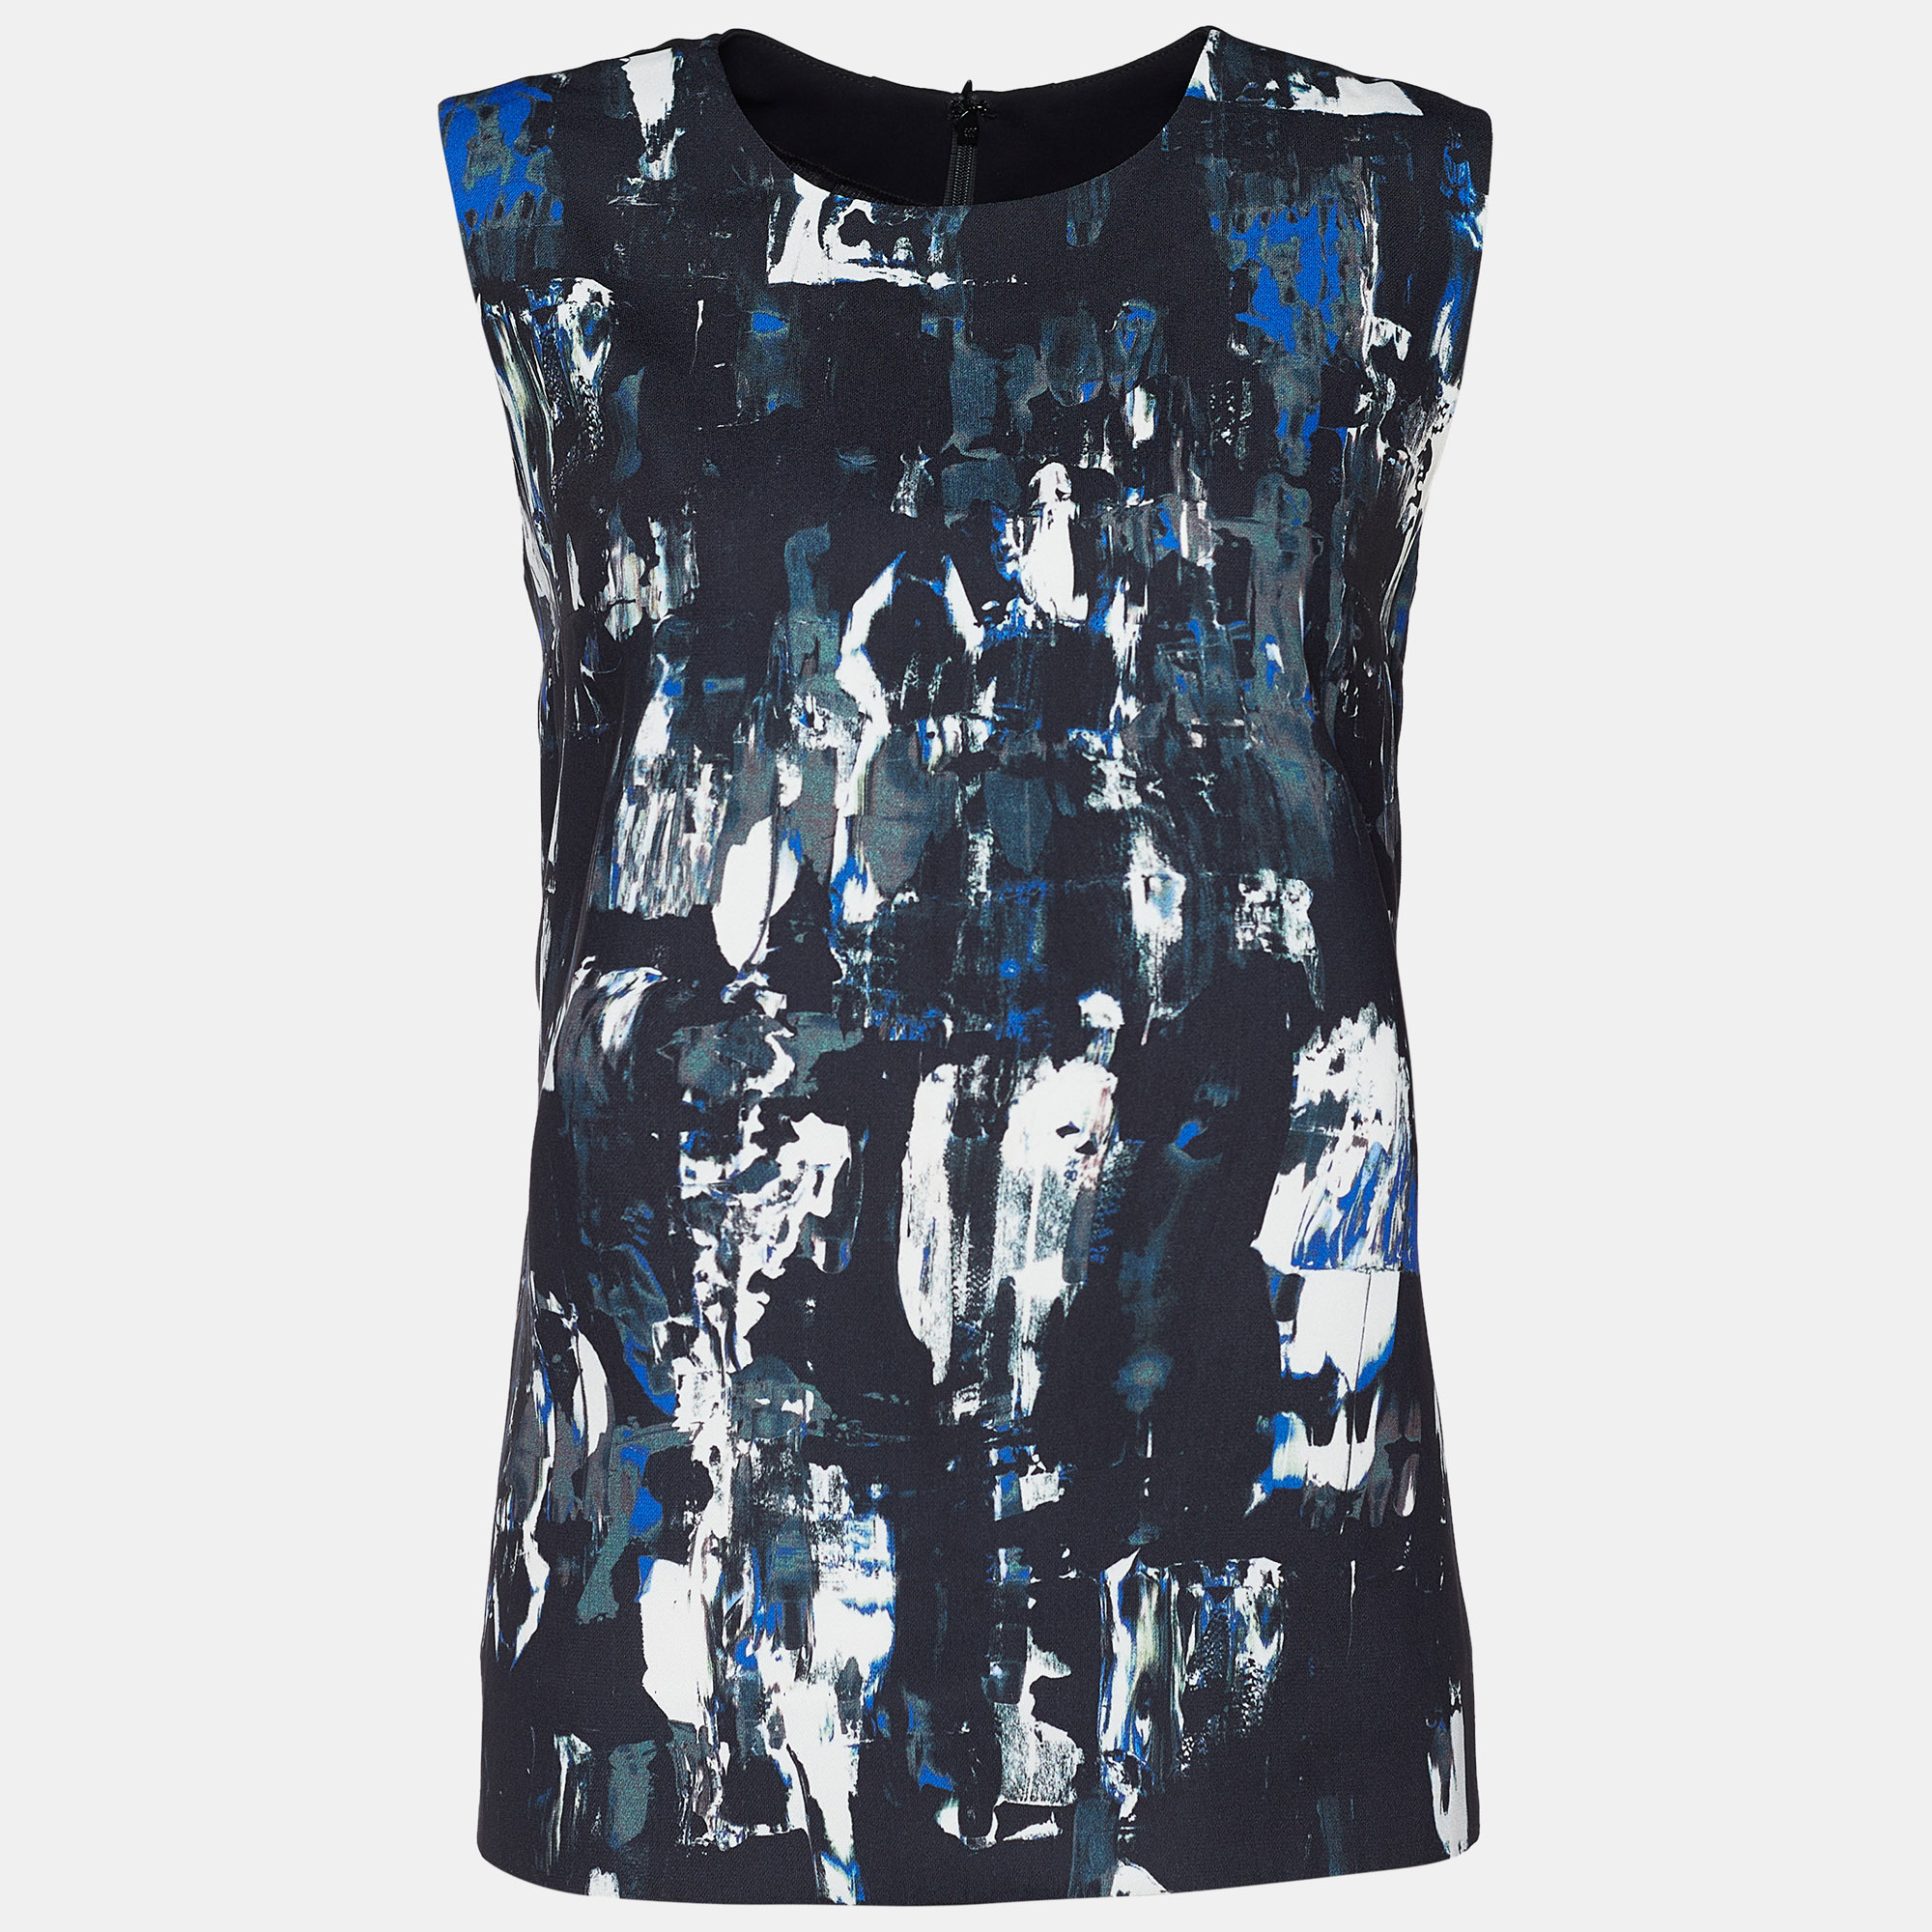 

McQ by Alexander McQueen Black Printed Crepe Sleeveless Top